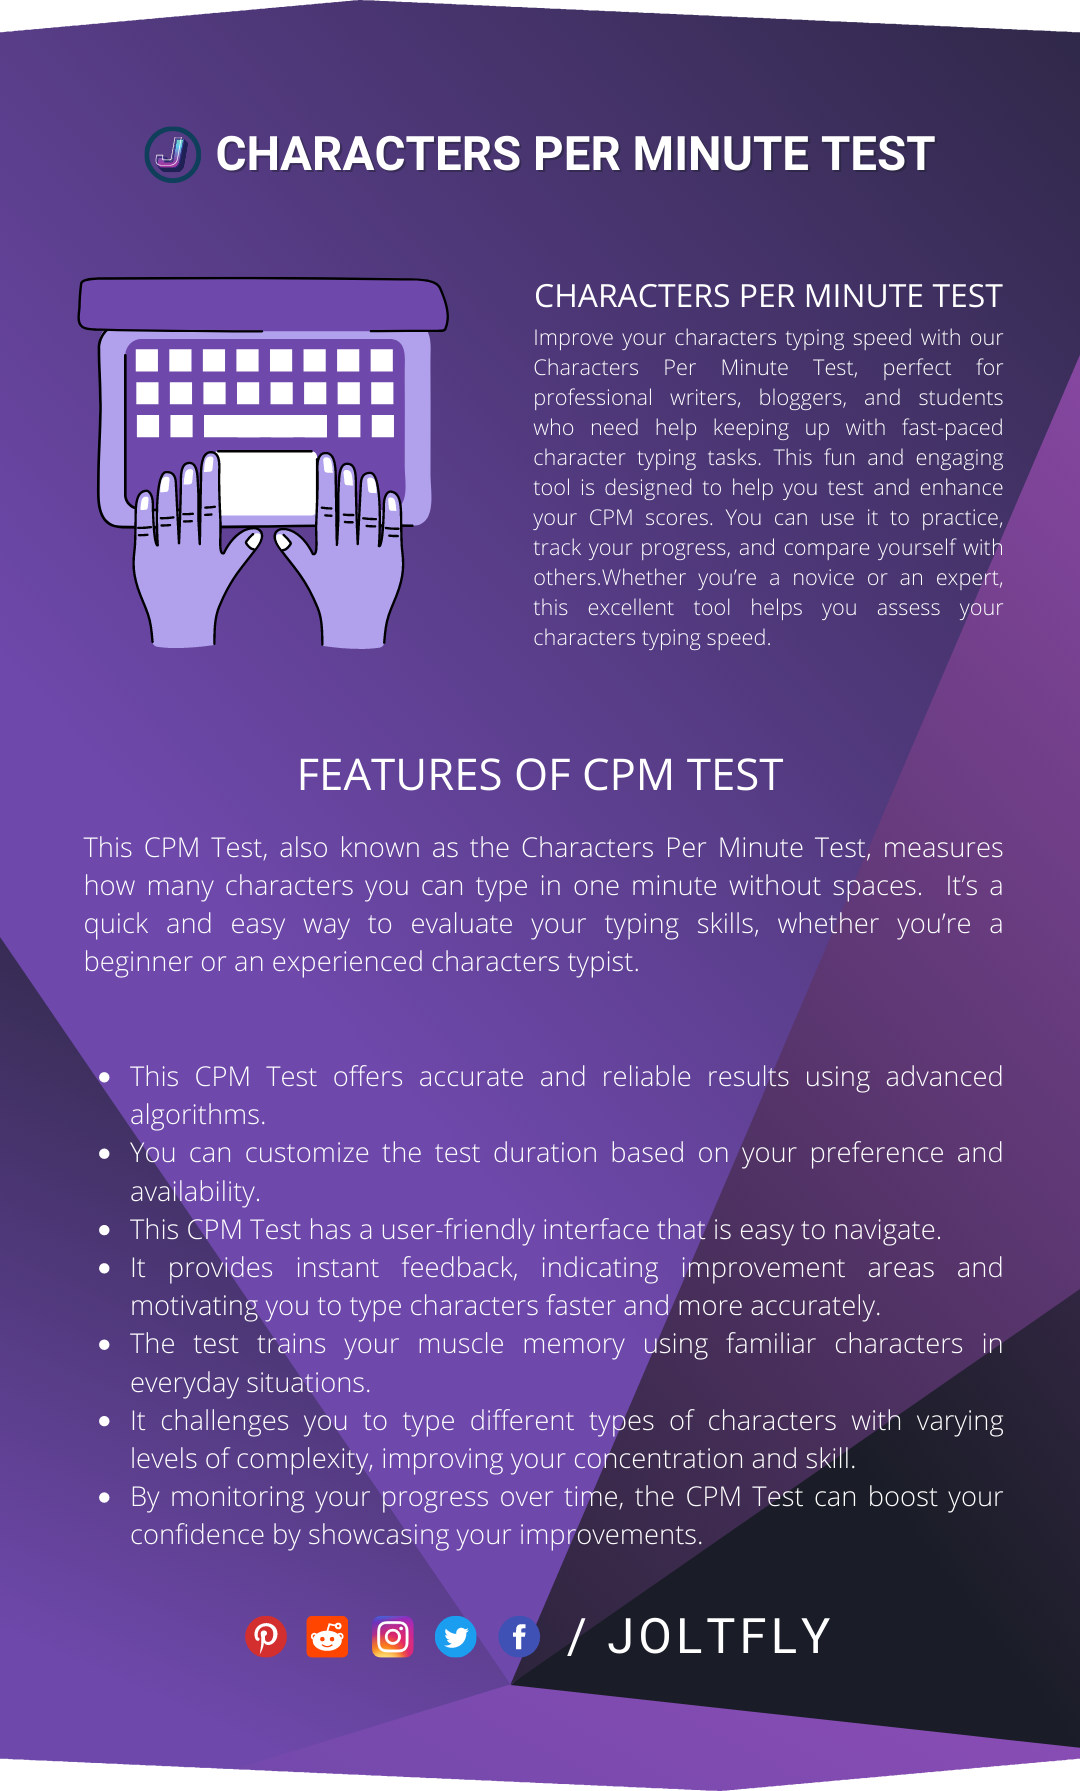 CPM Test - Features